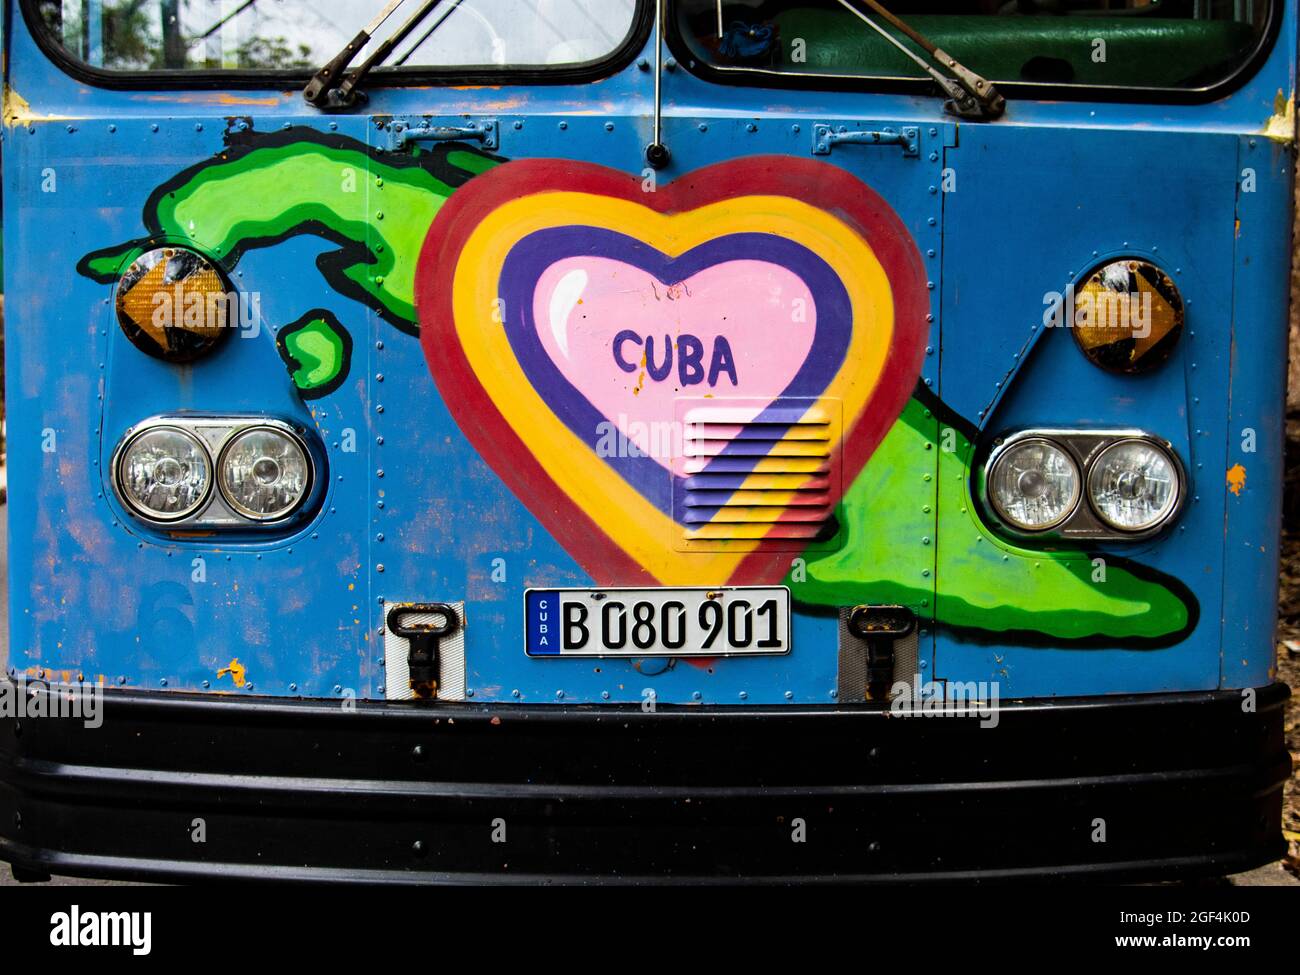 Cuban artwork on the front of a bus in Havana, Cuba Stock Photo